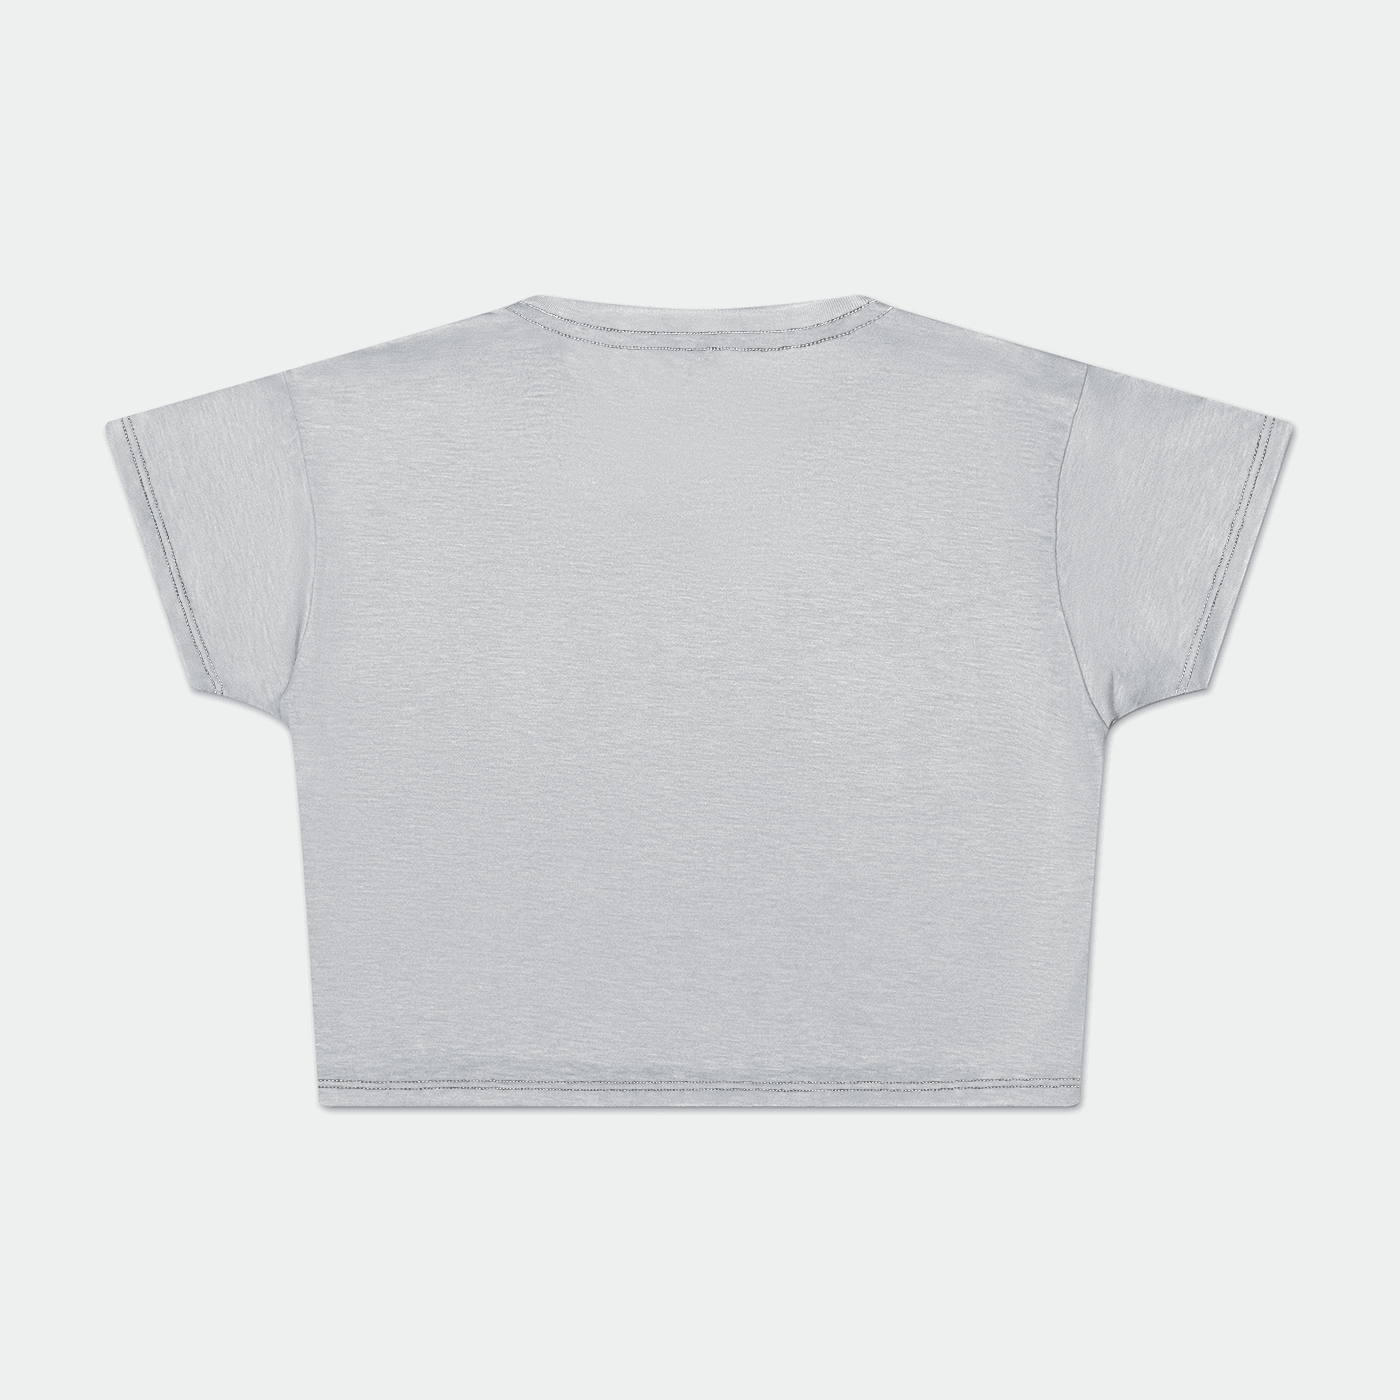 Mindful AF Vintage Style Cropped Baby Tee - Yoga Bitch